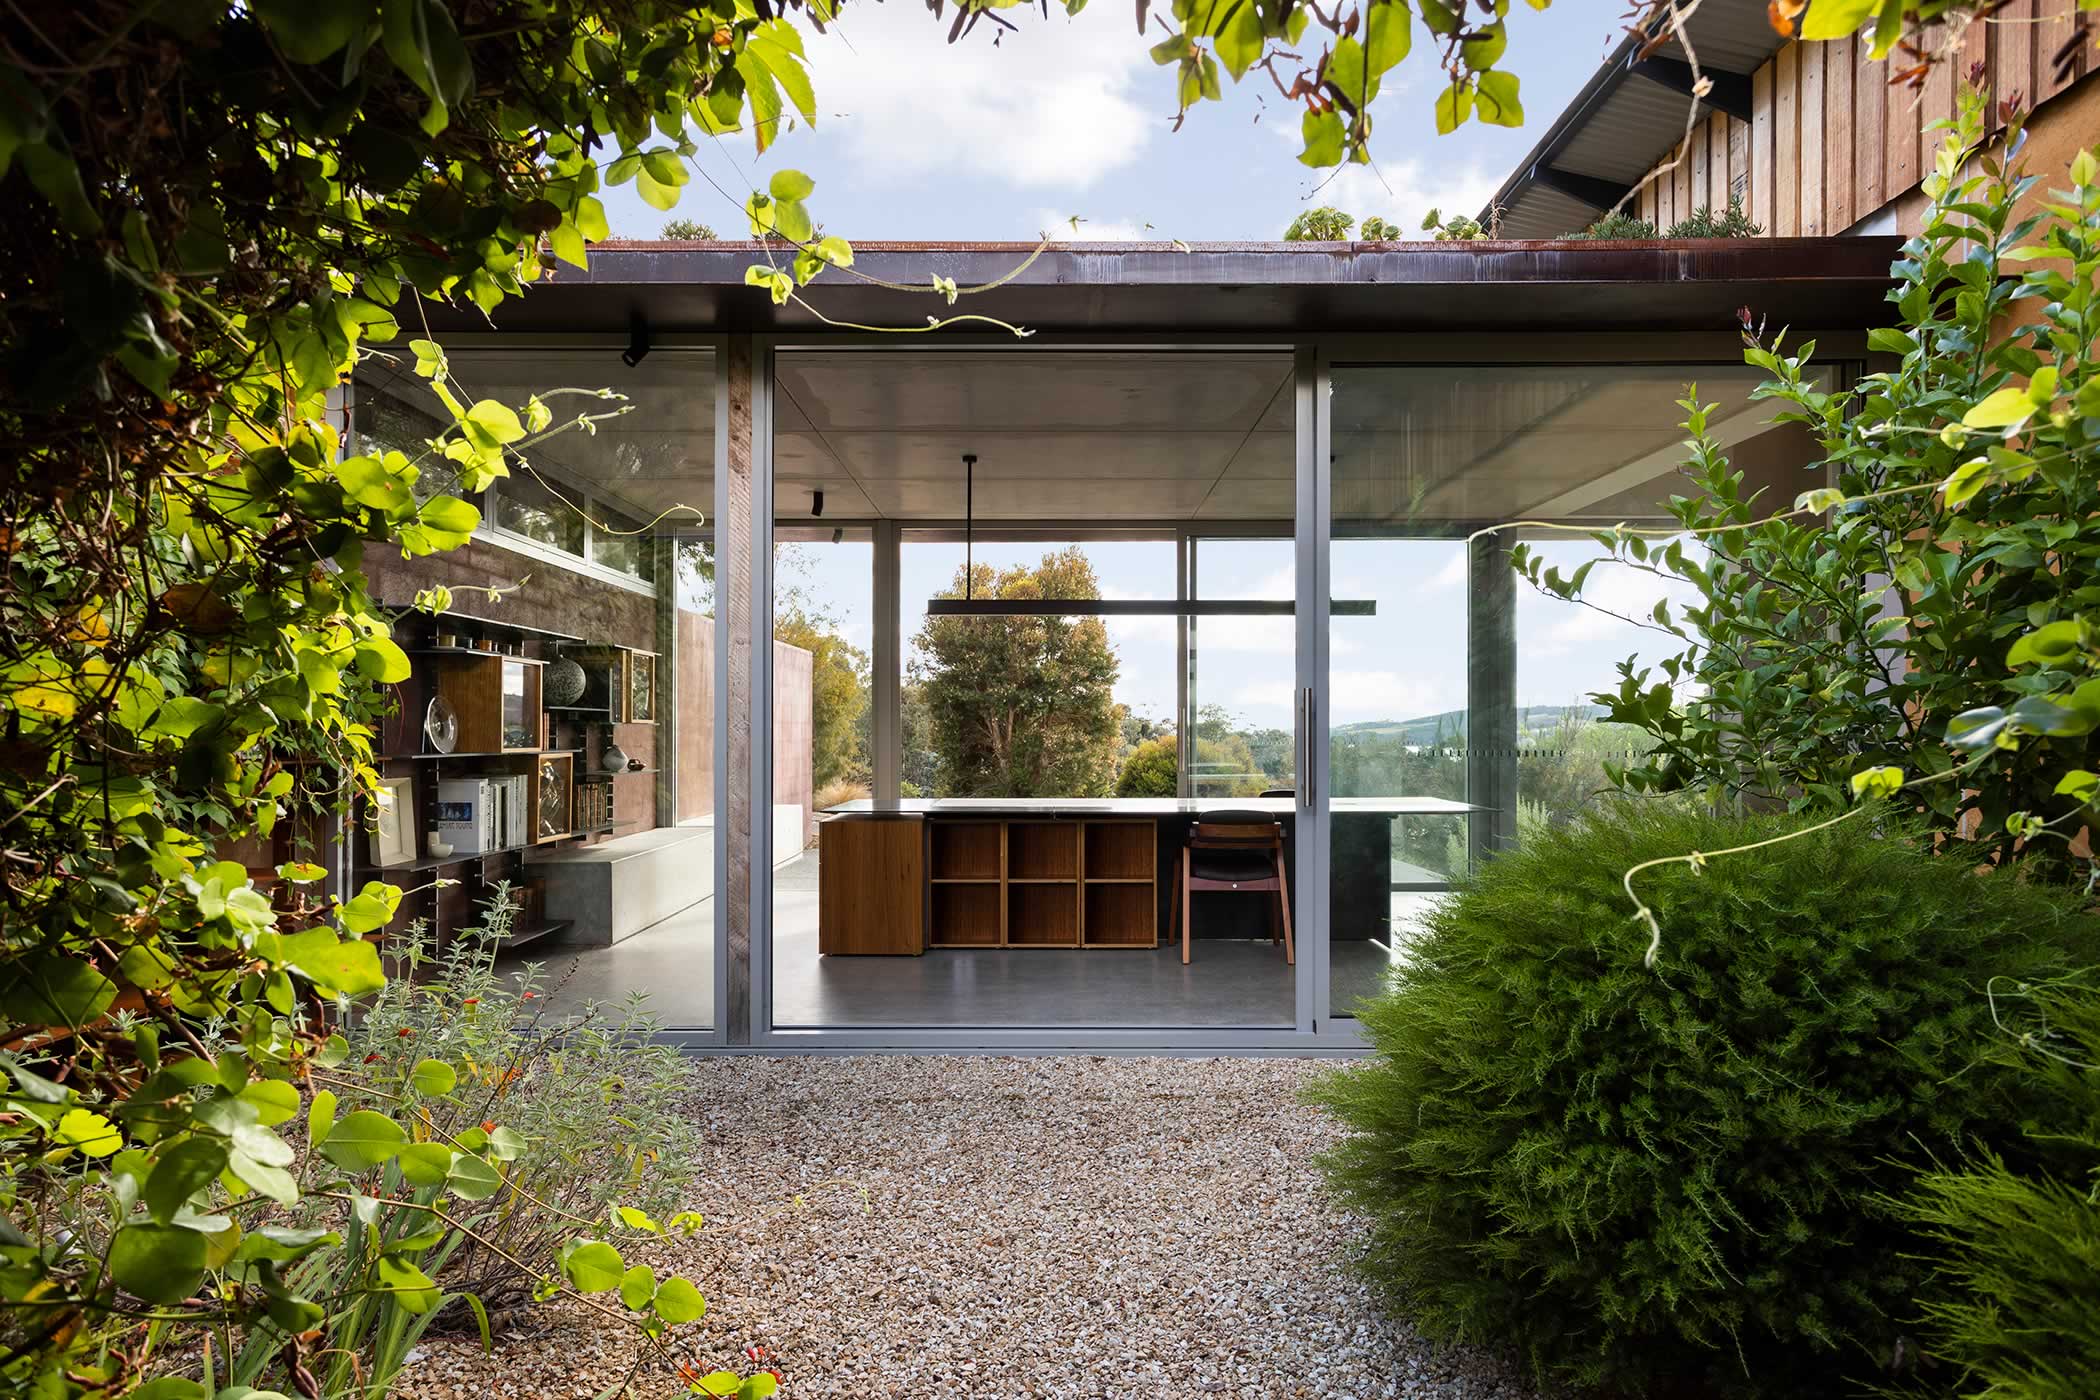 Residential extension, Kettering, Tasmania: The studio extends into the existing lush sunken courtyard-garden, immersed in a world of intimacy and calm. Continuous garden wall steel shelving and concrete seating blur the boundaries. Photo by Adam Gibson.